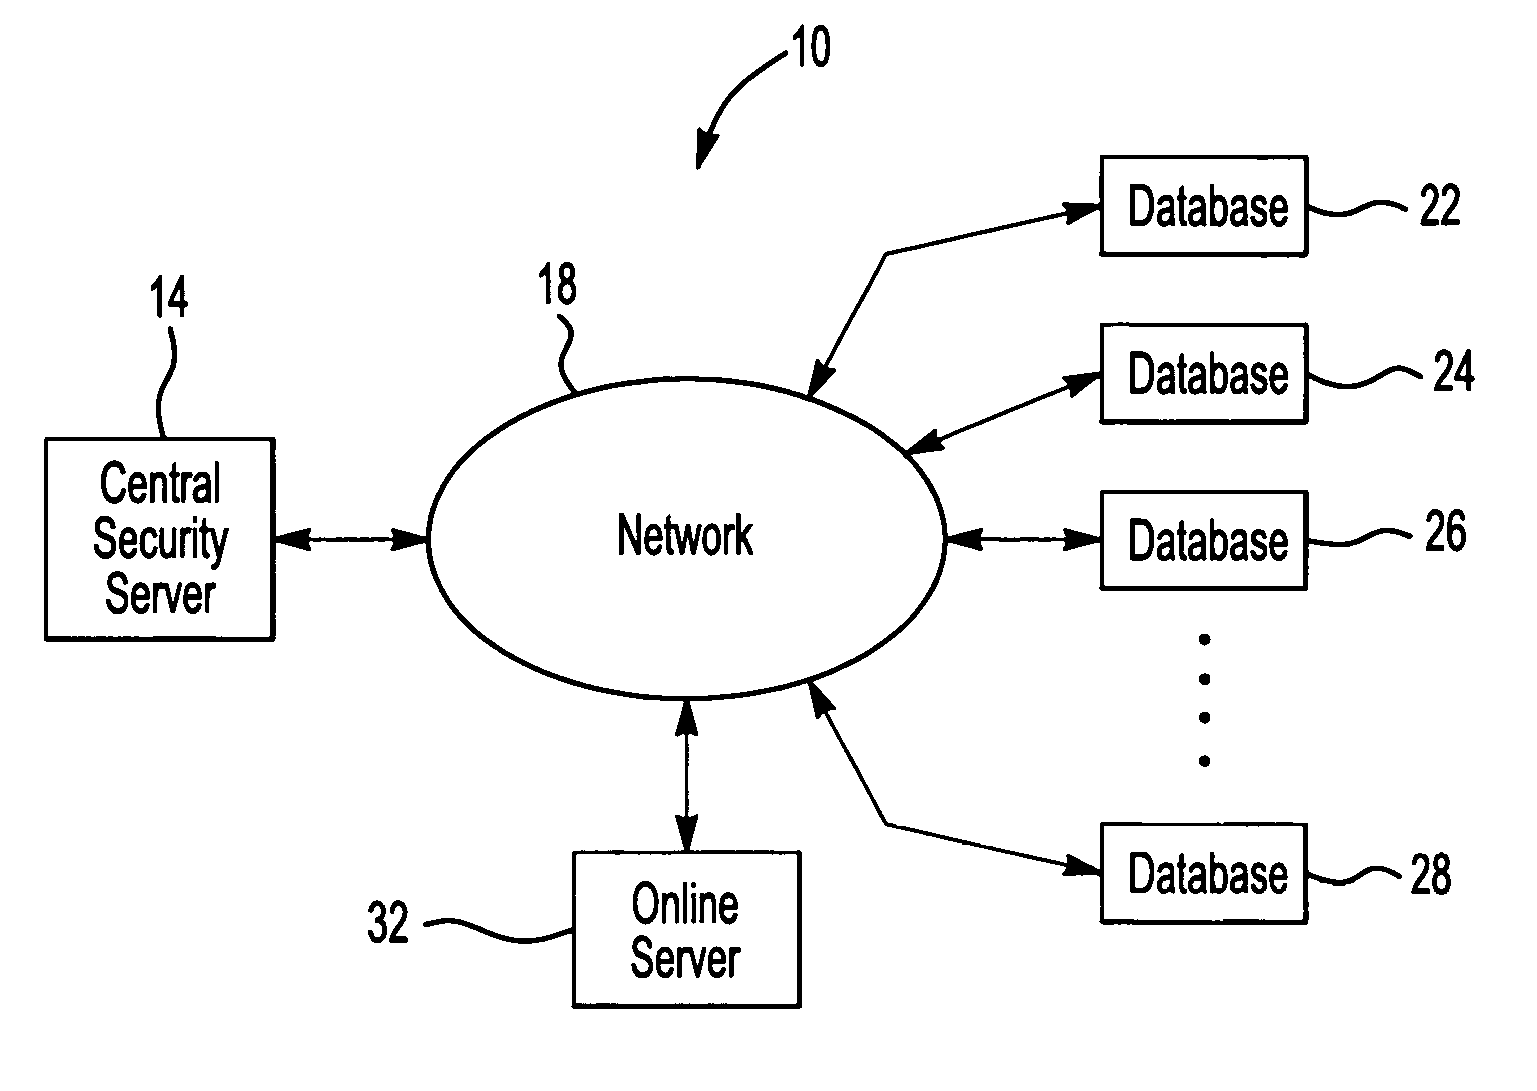 Method and system of auditing databases for security compliance